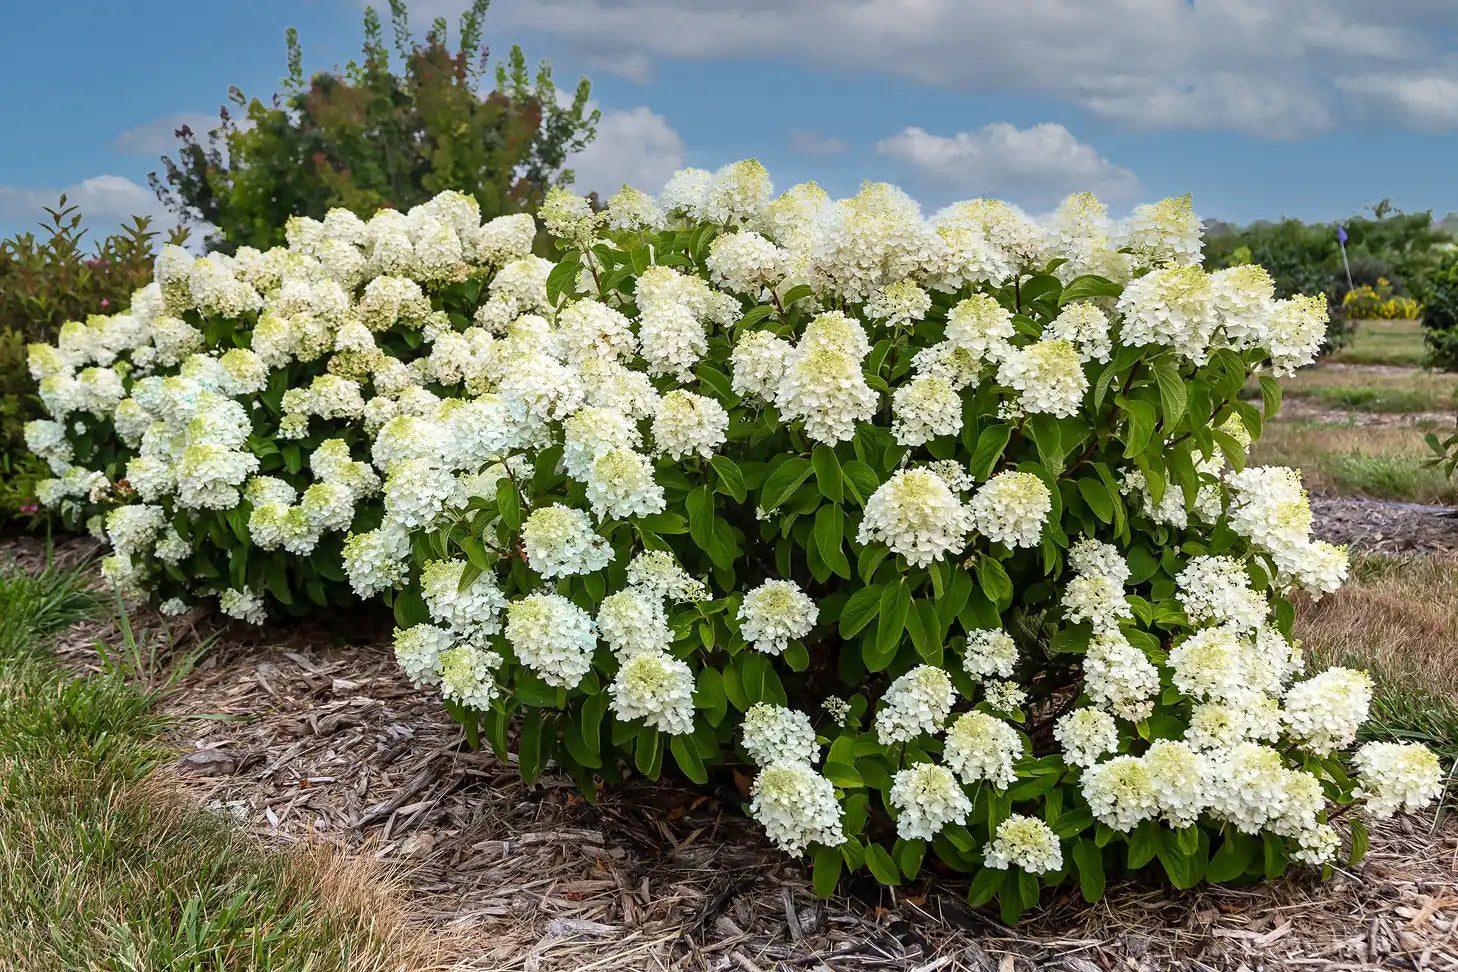 Big clusters of large, warm, milky white blooms of Little Hottie® Hydrangea amid dark green foliage agaonst a summer sky. Loves the heat, with blooms beginning in July through September.